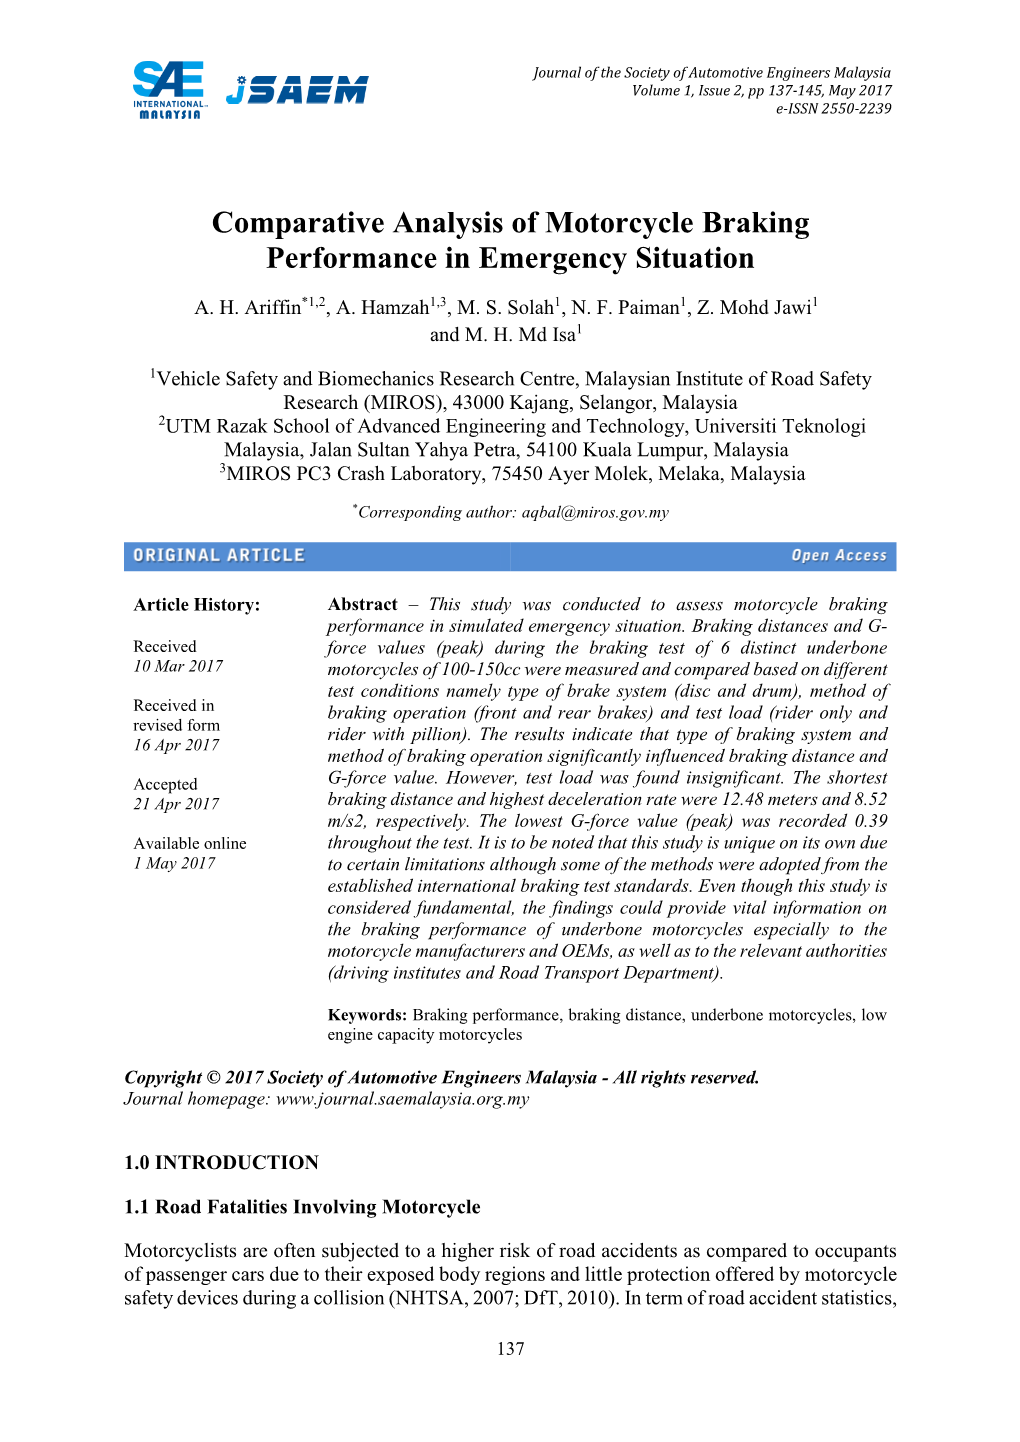 Comparative Analysis of Motorcycle Braking Performance in Emergency Situation